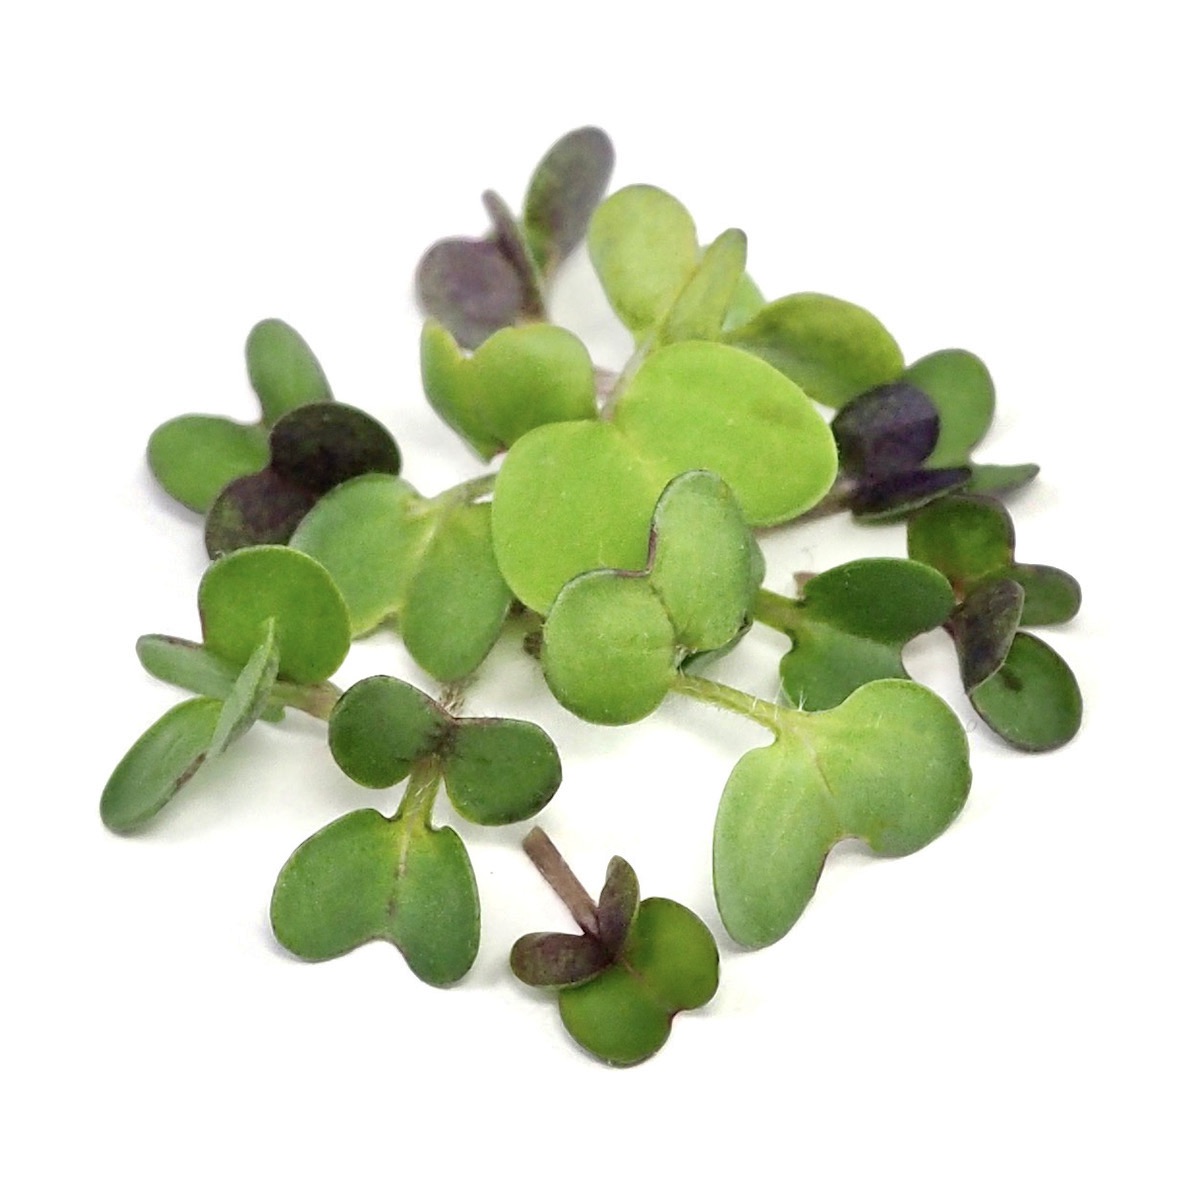 Organic Mustard sprouts and microgreens